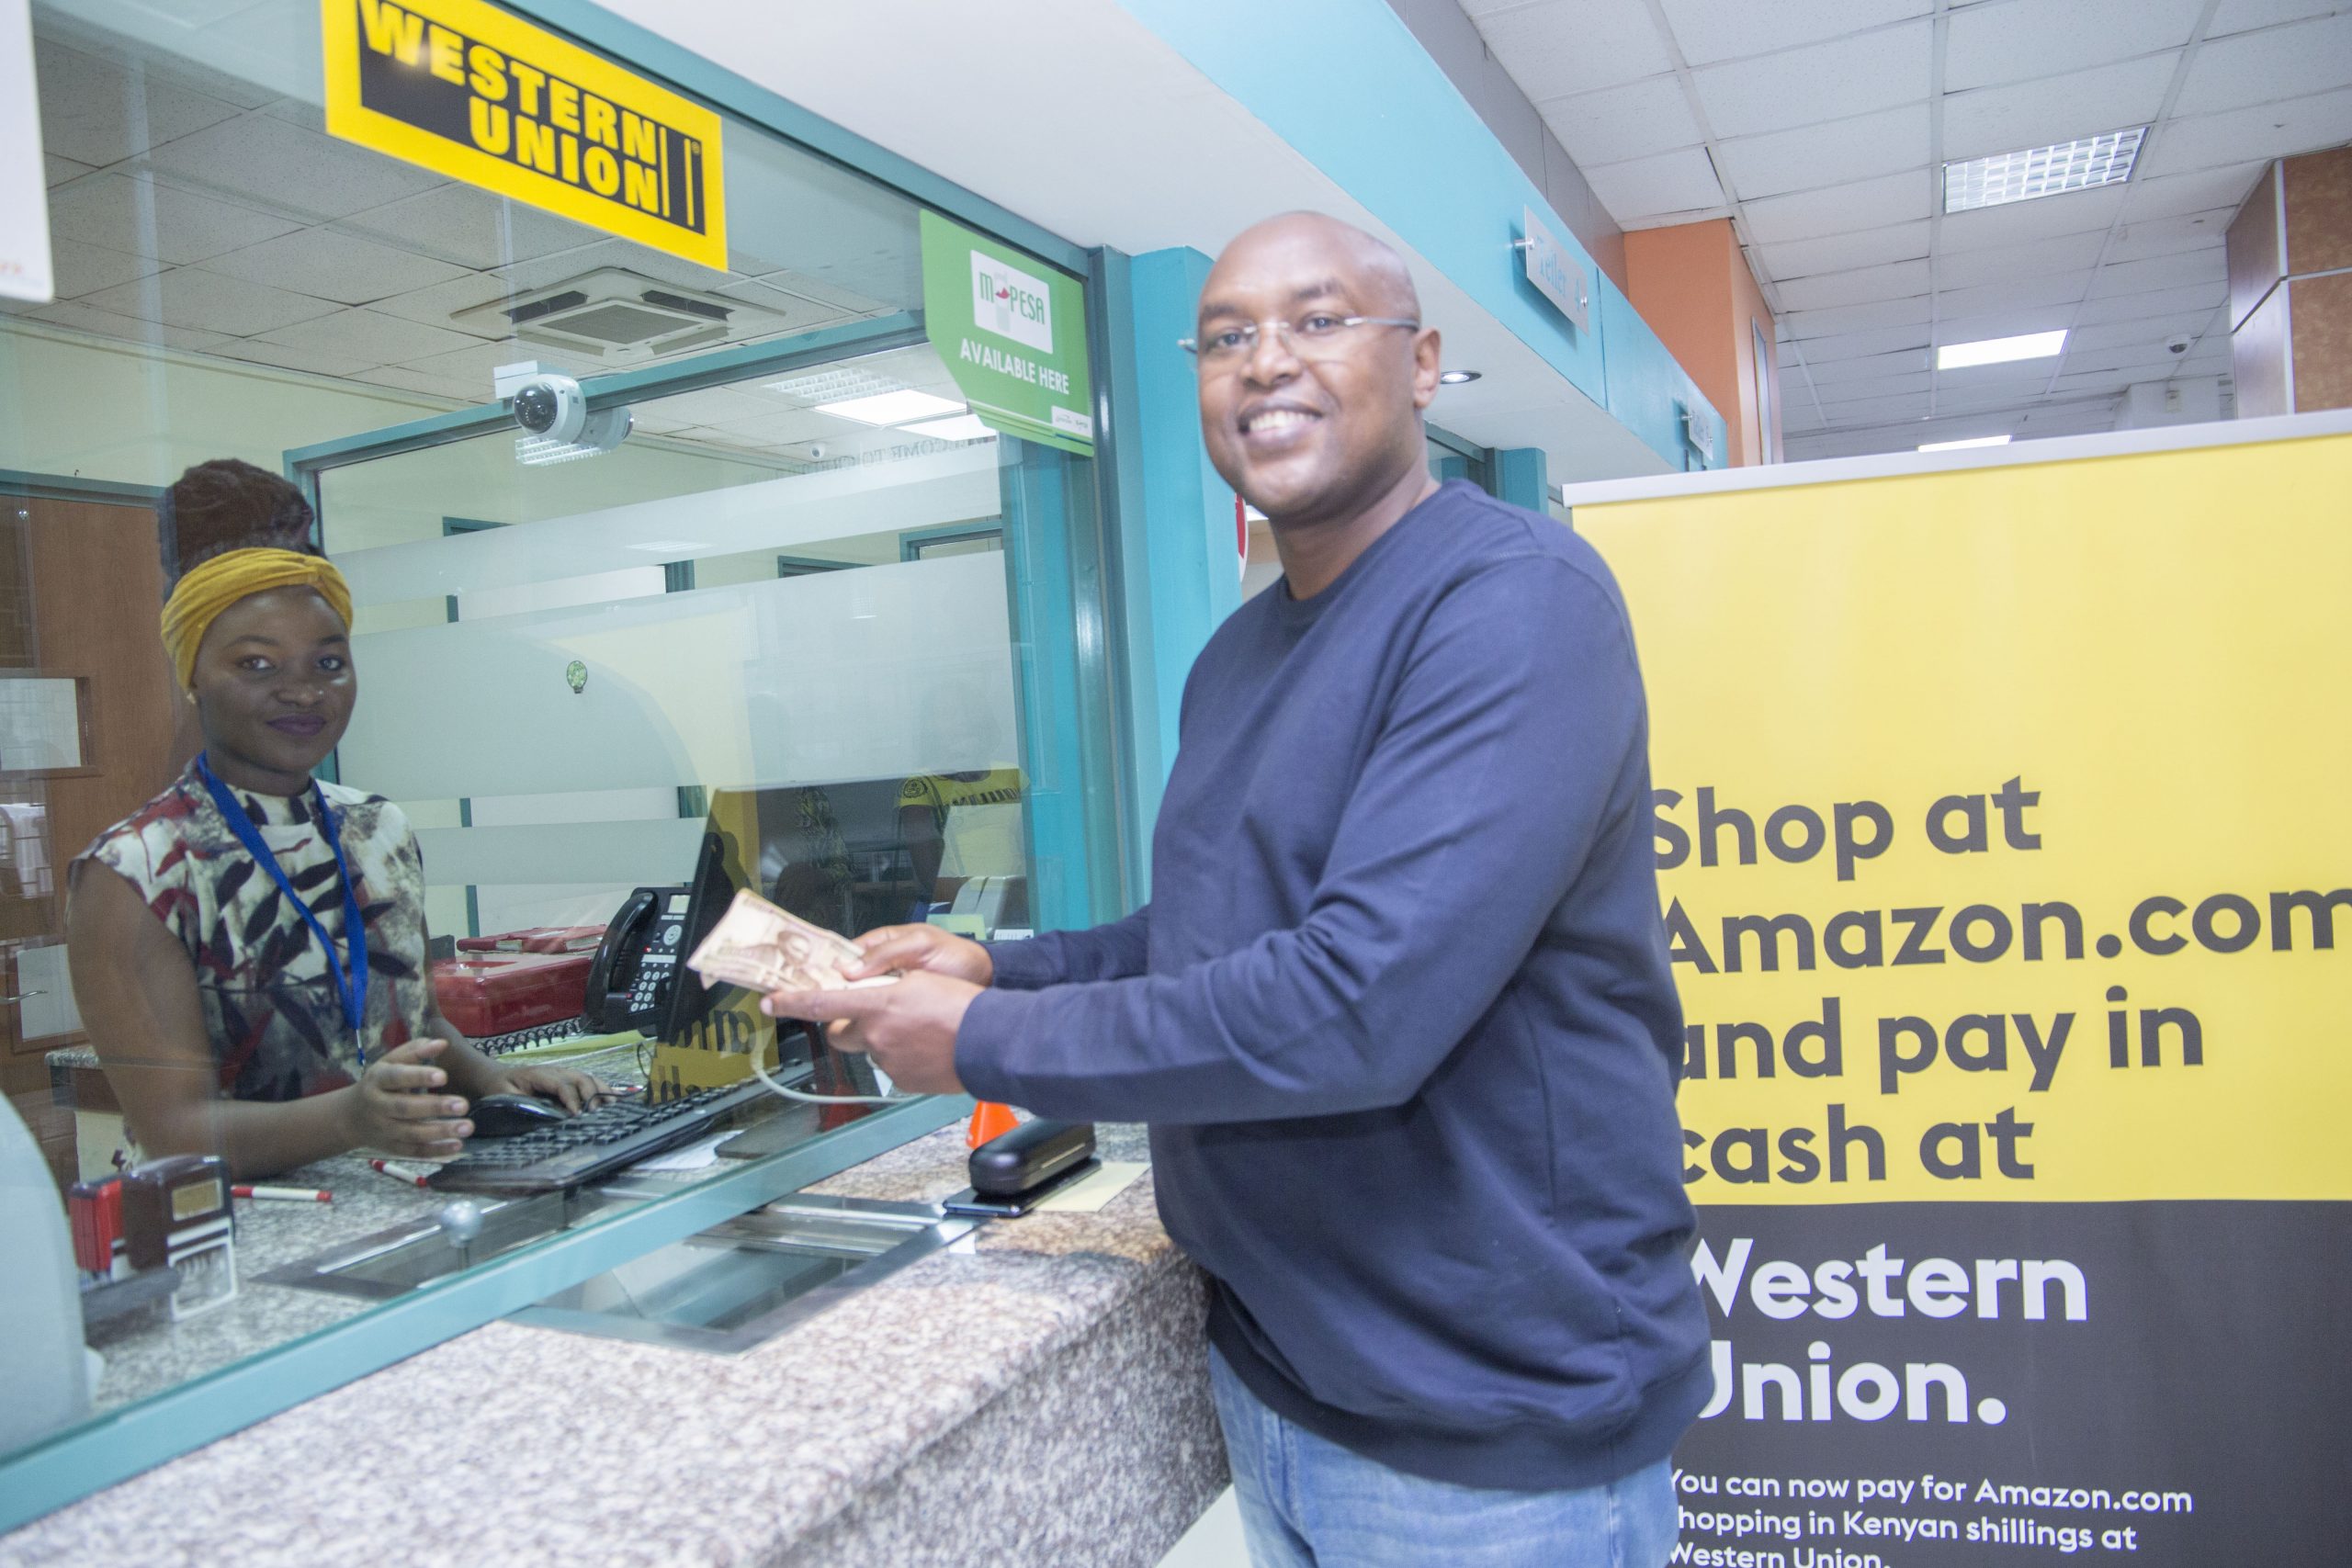 Western Union debuts new payment option  for Amazon.com shoppers in Kenya